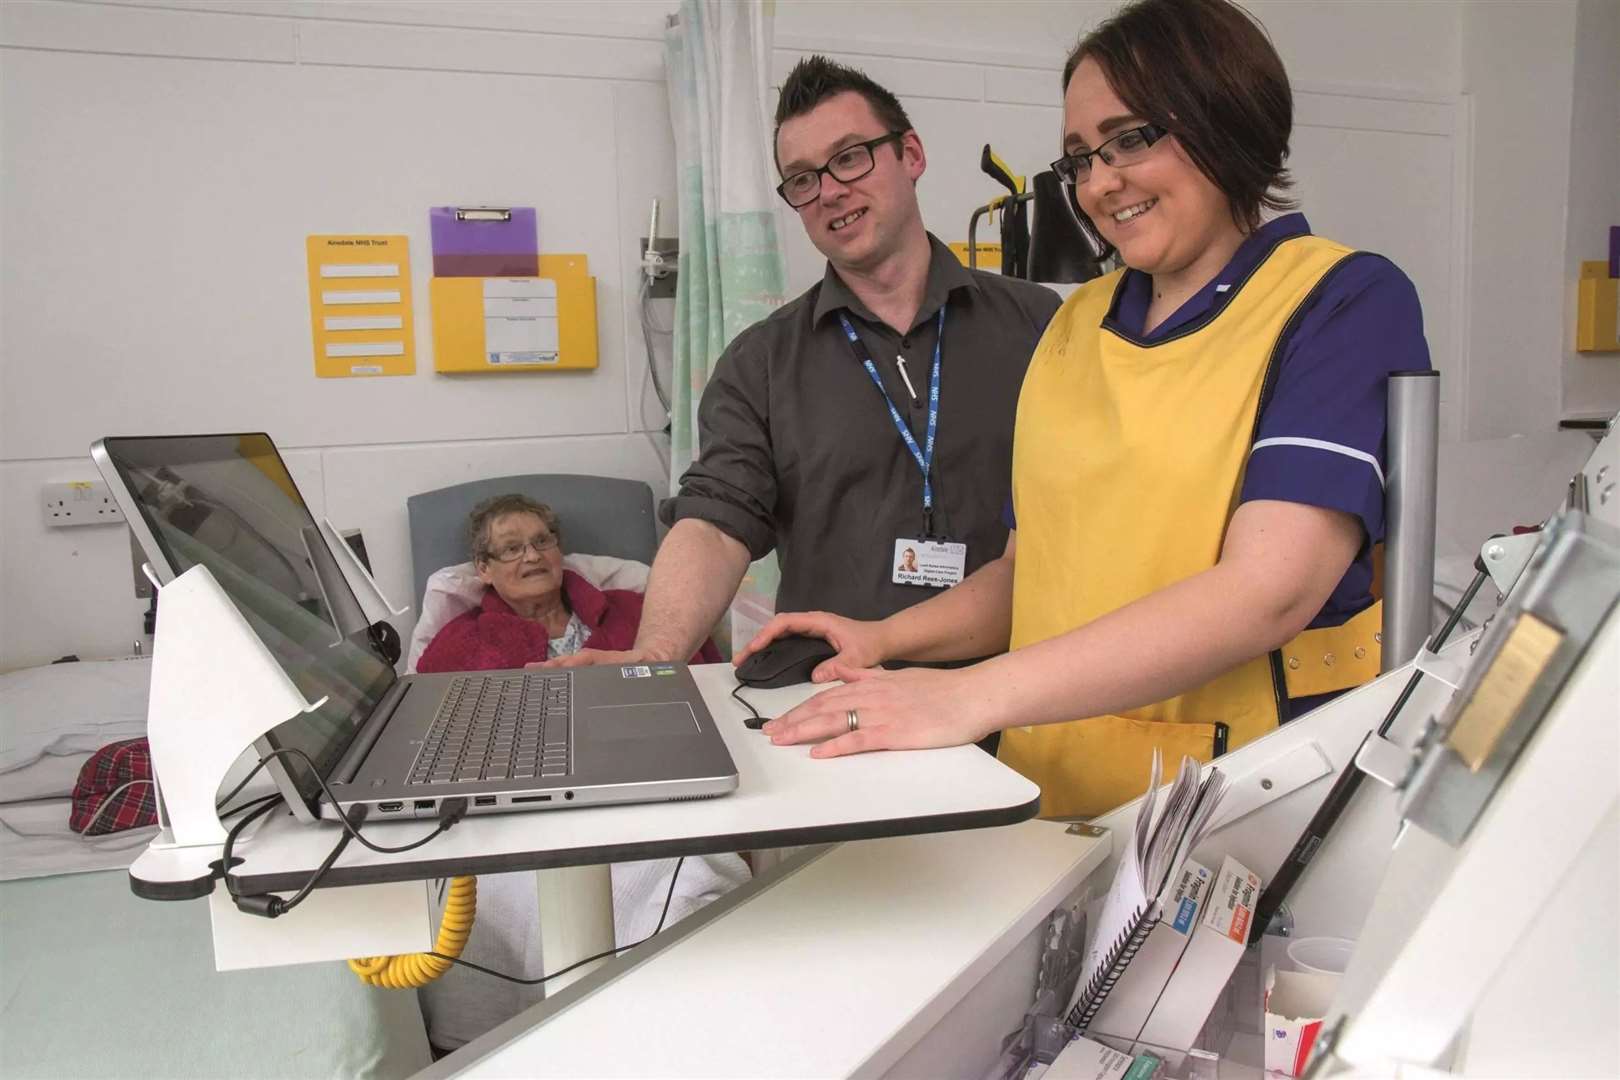 Hospital Electronic Prescribing and Medication Administration system will come into use in NHS Grampian.